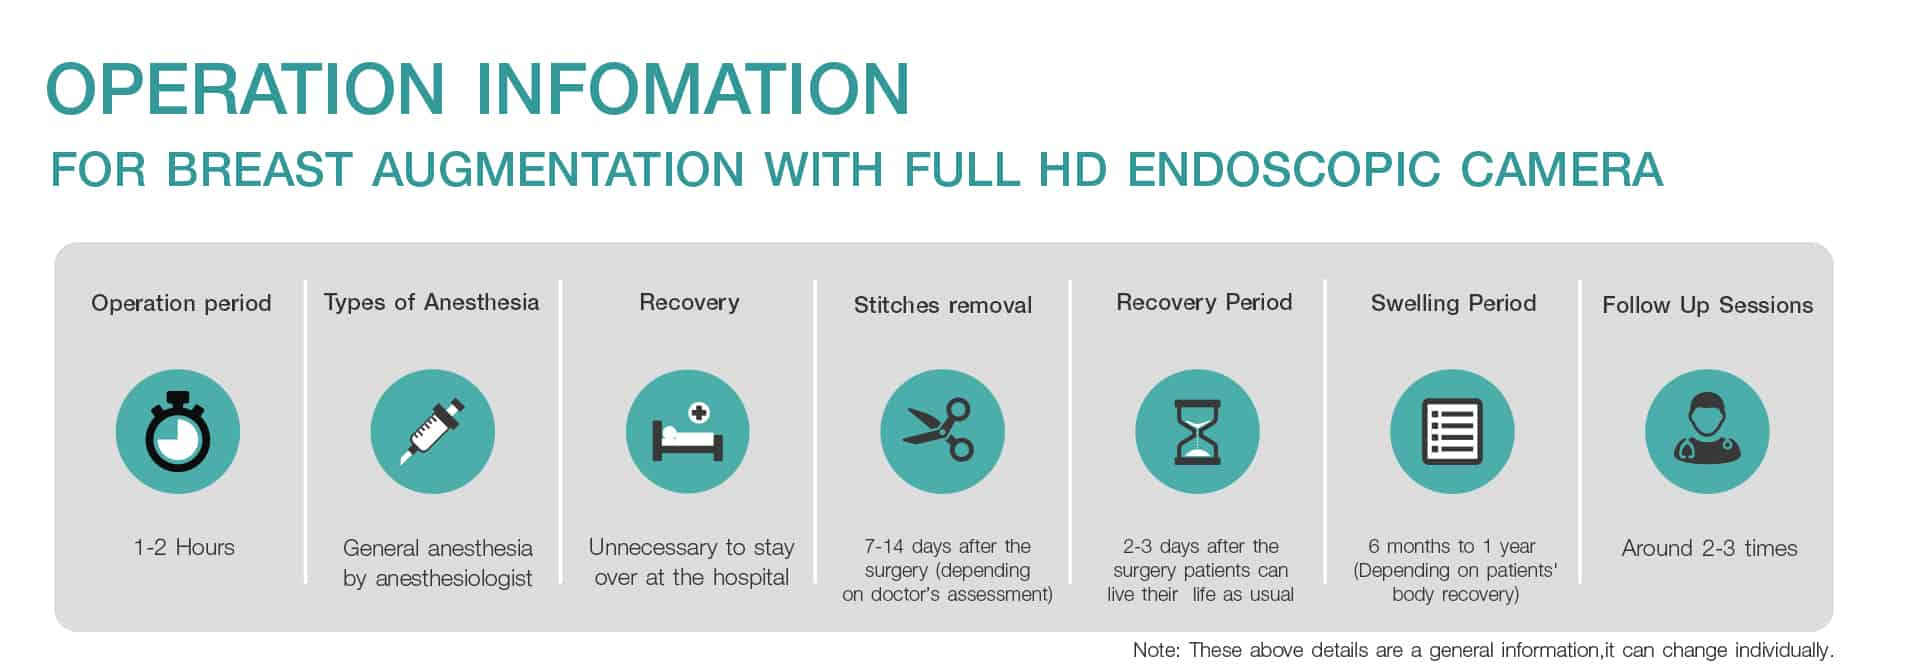 Operation Information for Breast Augmentation with Full HD endoscopic camera